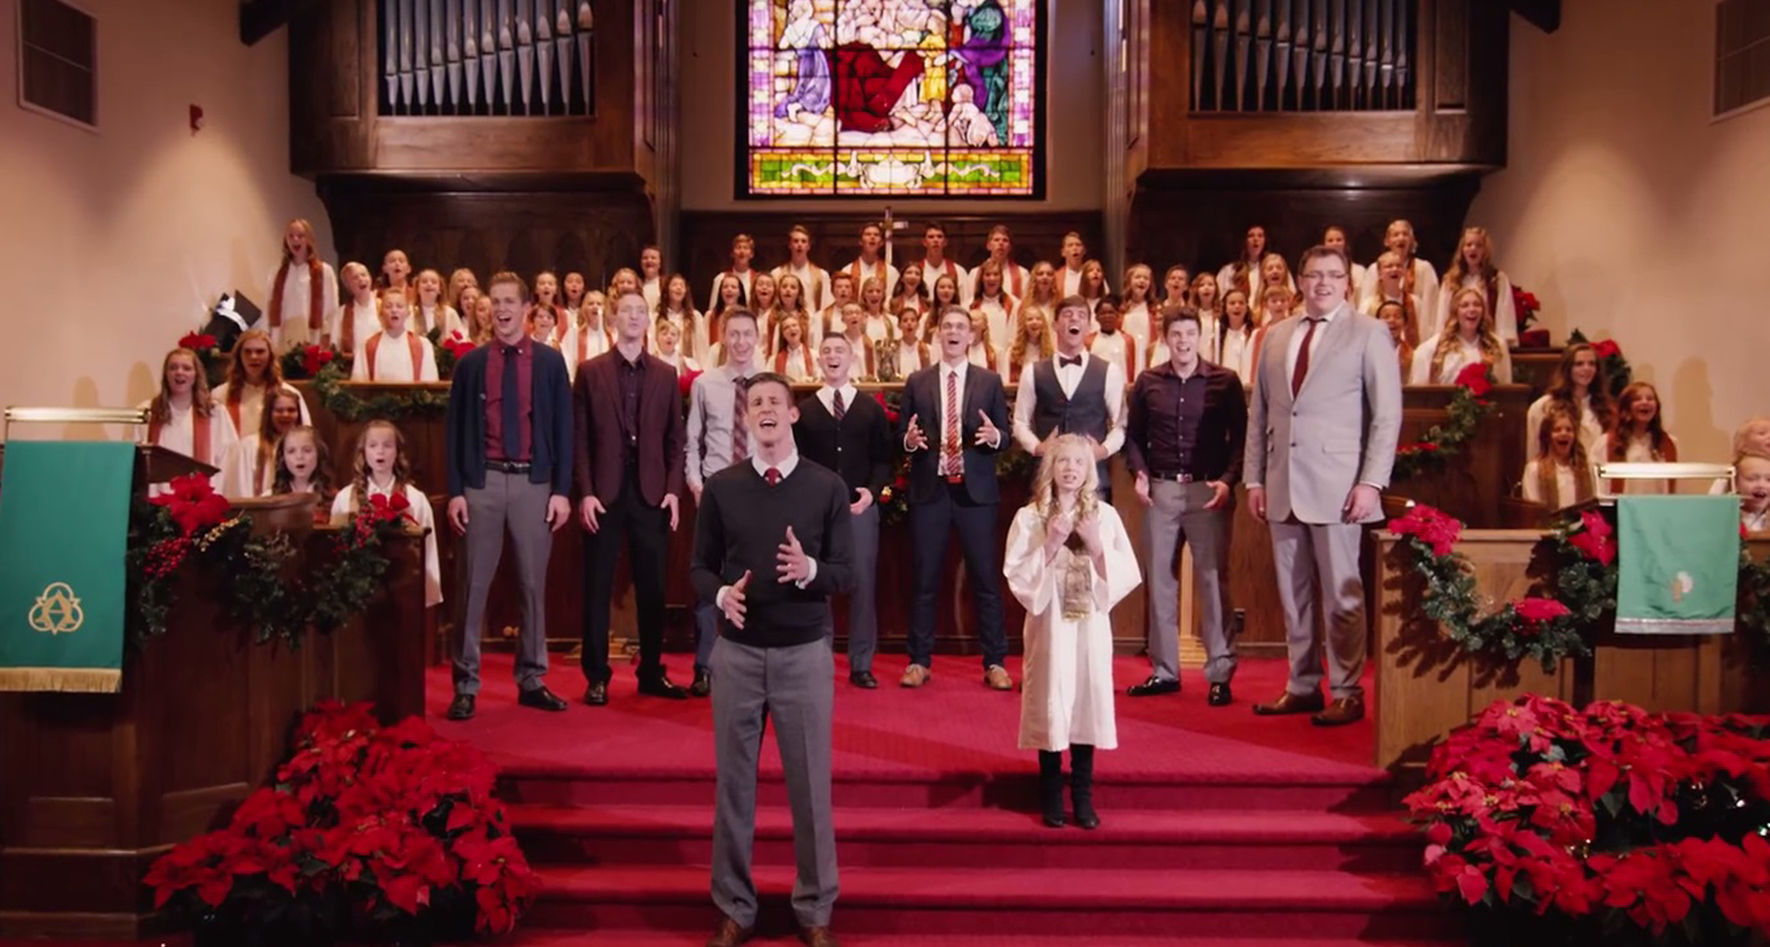 BYU Vocal Point and the One Voice Children's Choir